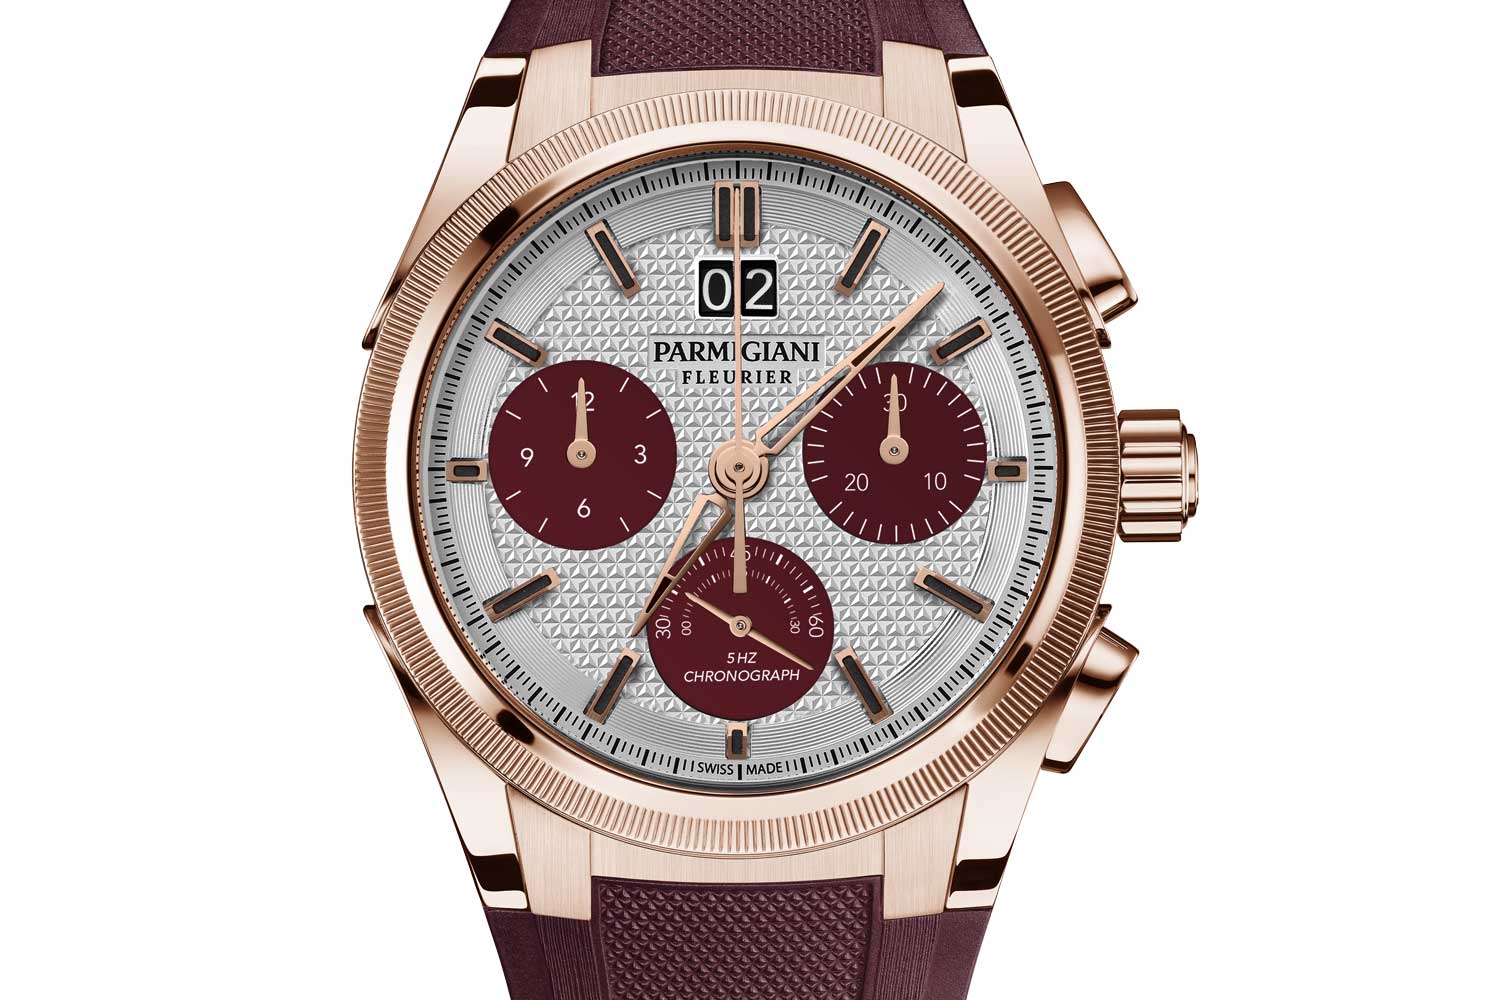 Tonda GT Chronograph in rose gold with large date